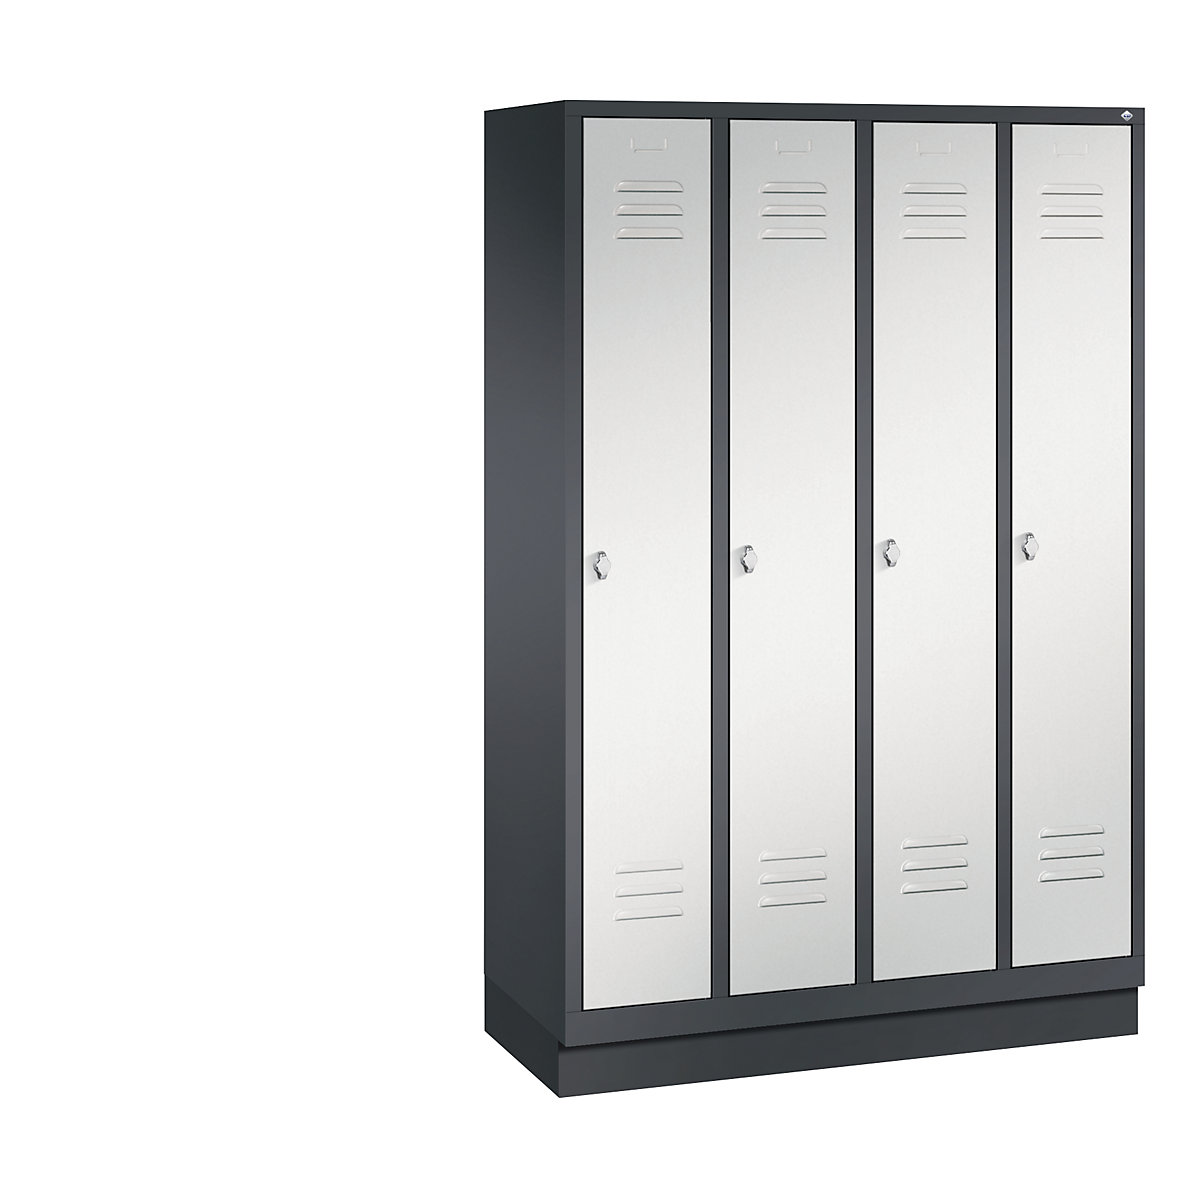 CLASSIC cloakroom locker with plinth – C+P, 4 compartments, compartment width 300 mm, black grey / light grey-14